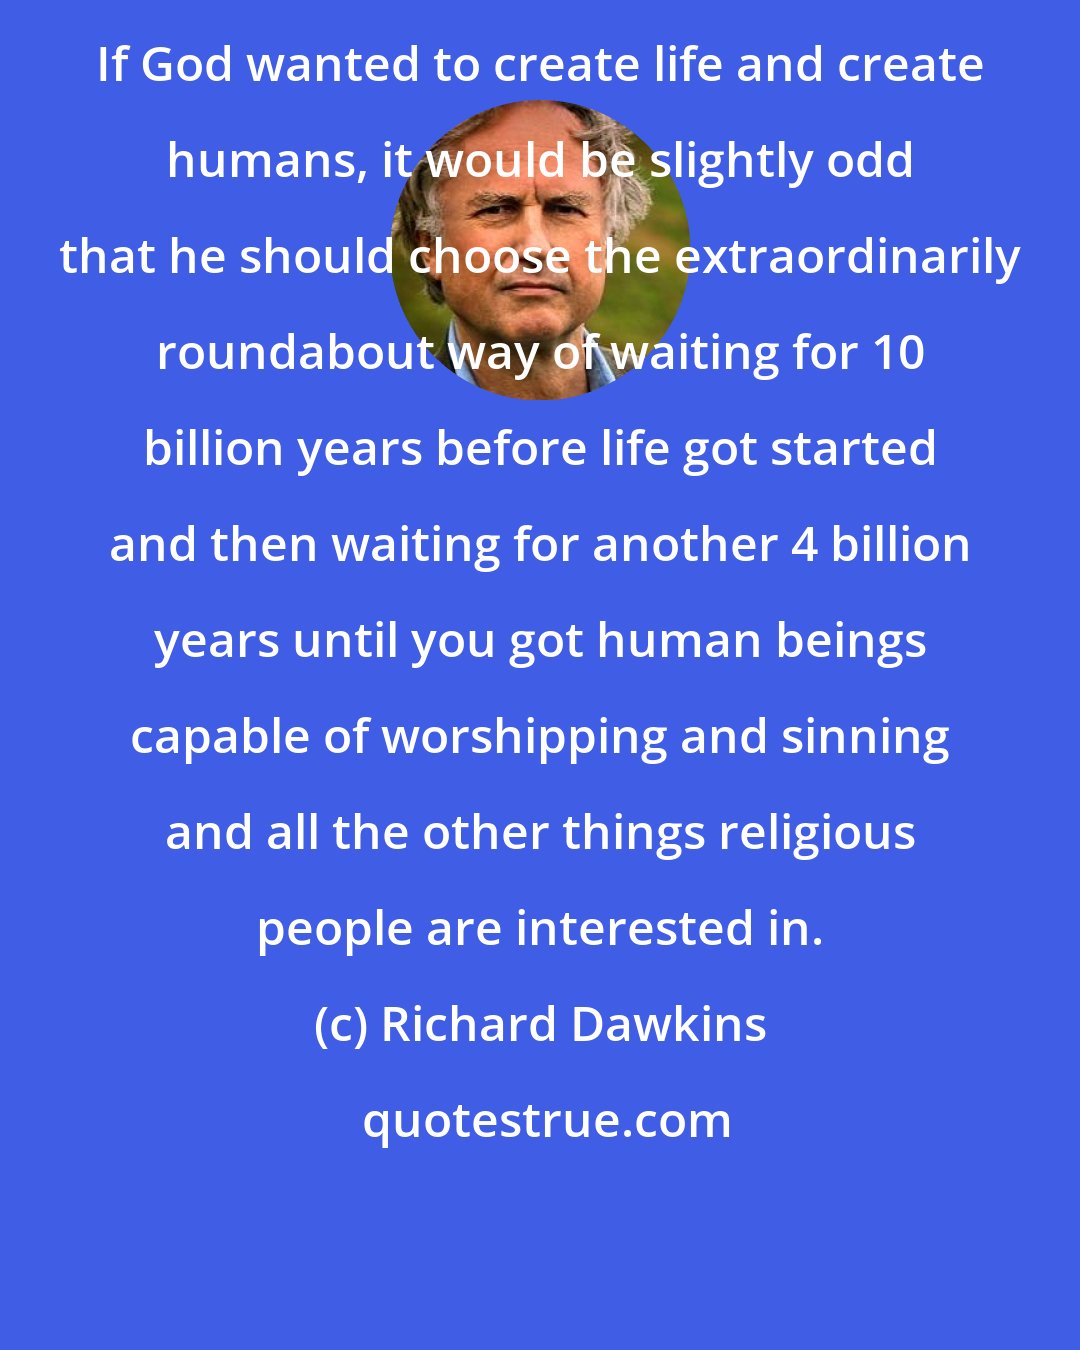 Richard Dawkins: If God wanted to create life and create humans, it would be slightly odd that he should choose the extraordinarily roundabout way of waiting for 10 billion years before life got started and then waiting for another 4 billion years until you got human beings capable of worshipping and sinning and all the other things religious people are interested in.